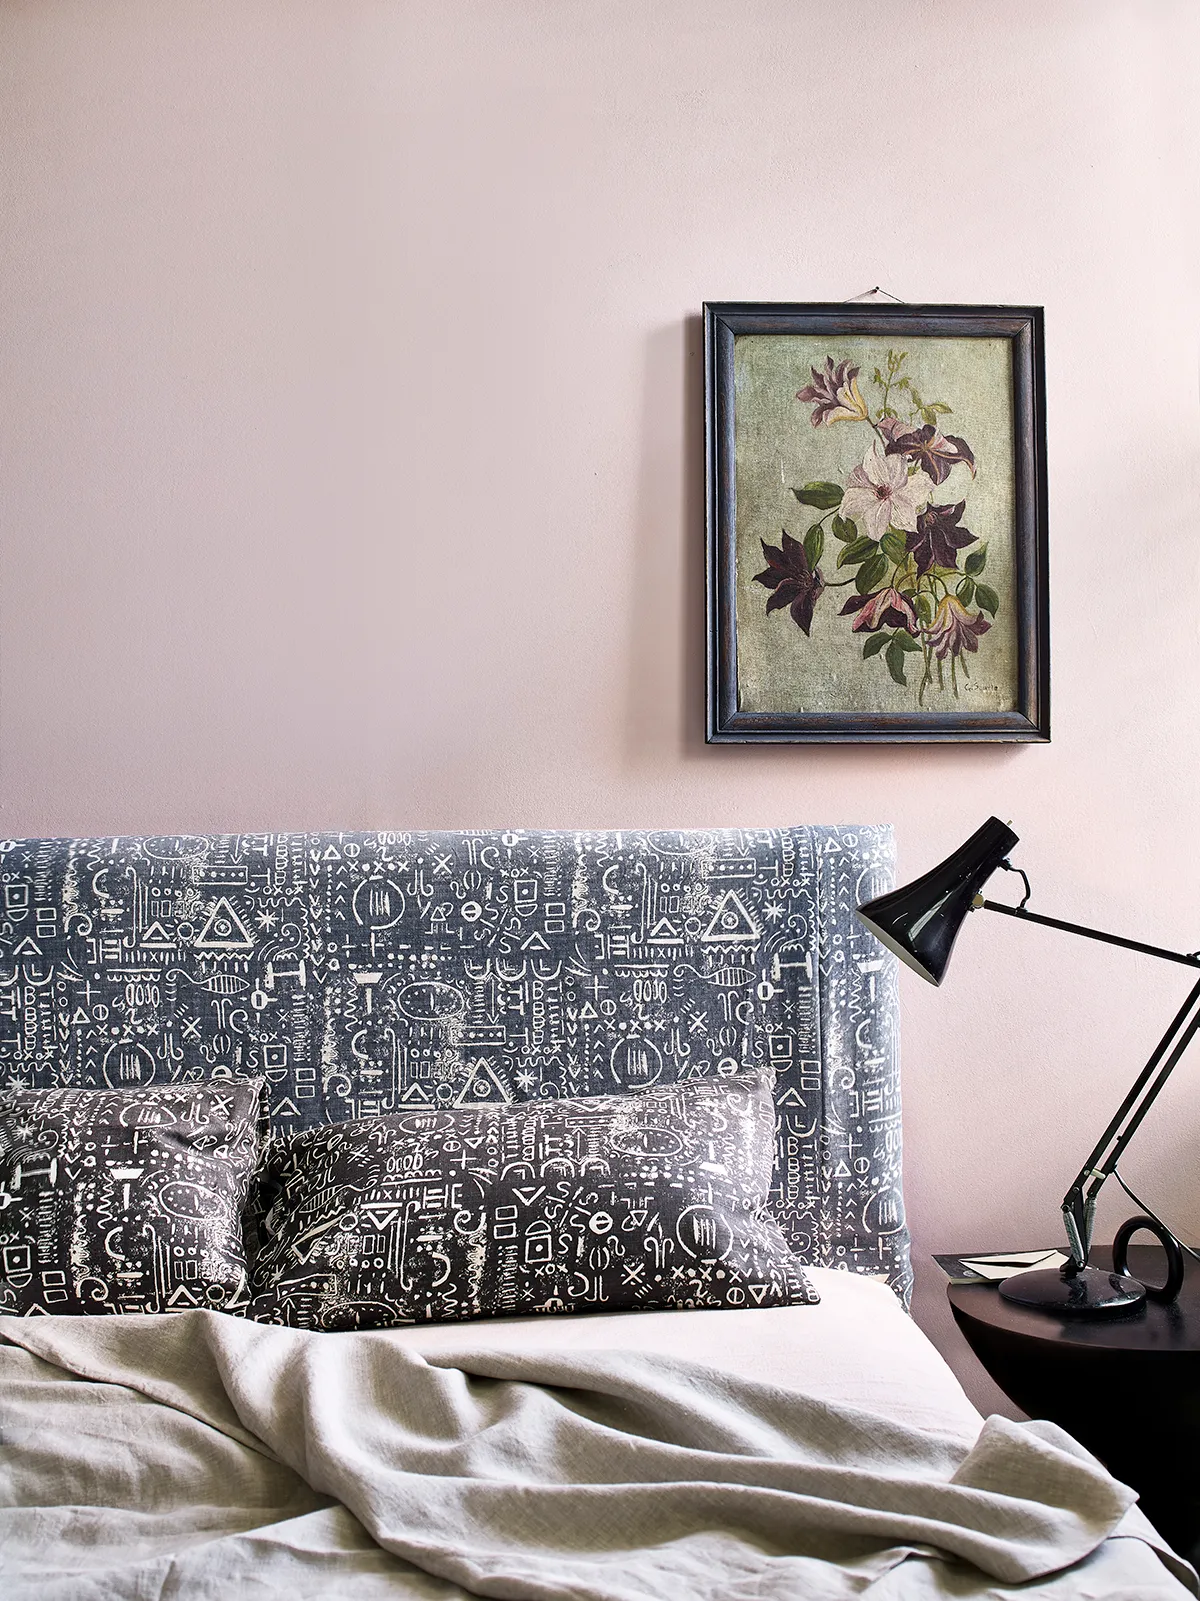 Annie Sloan - Fabric - Bedroom - Tacit in Old Violet Graphite Linen Union in Antoinette   Old White French Linen   Old White - Wall Paint in Antoinette